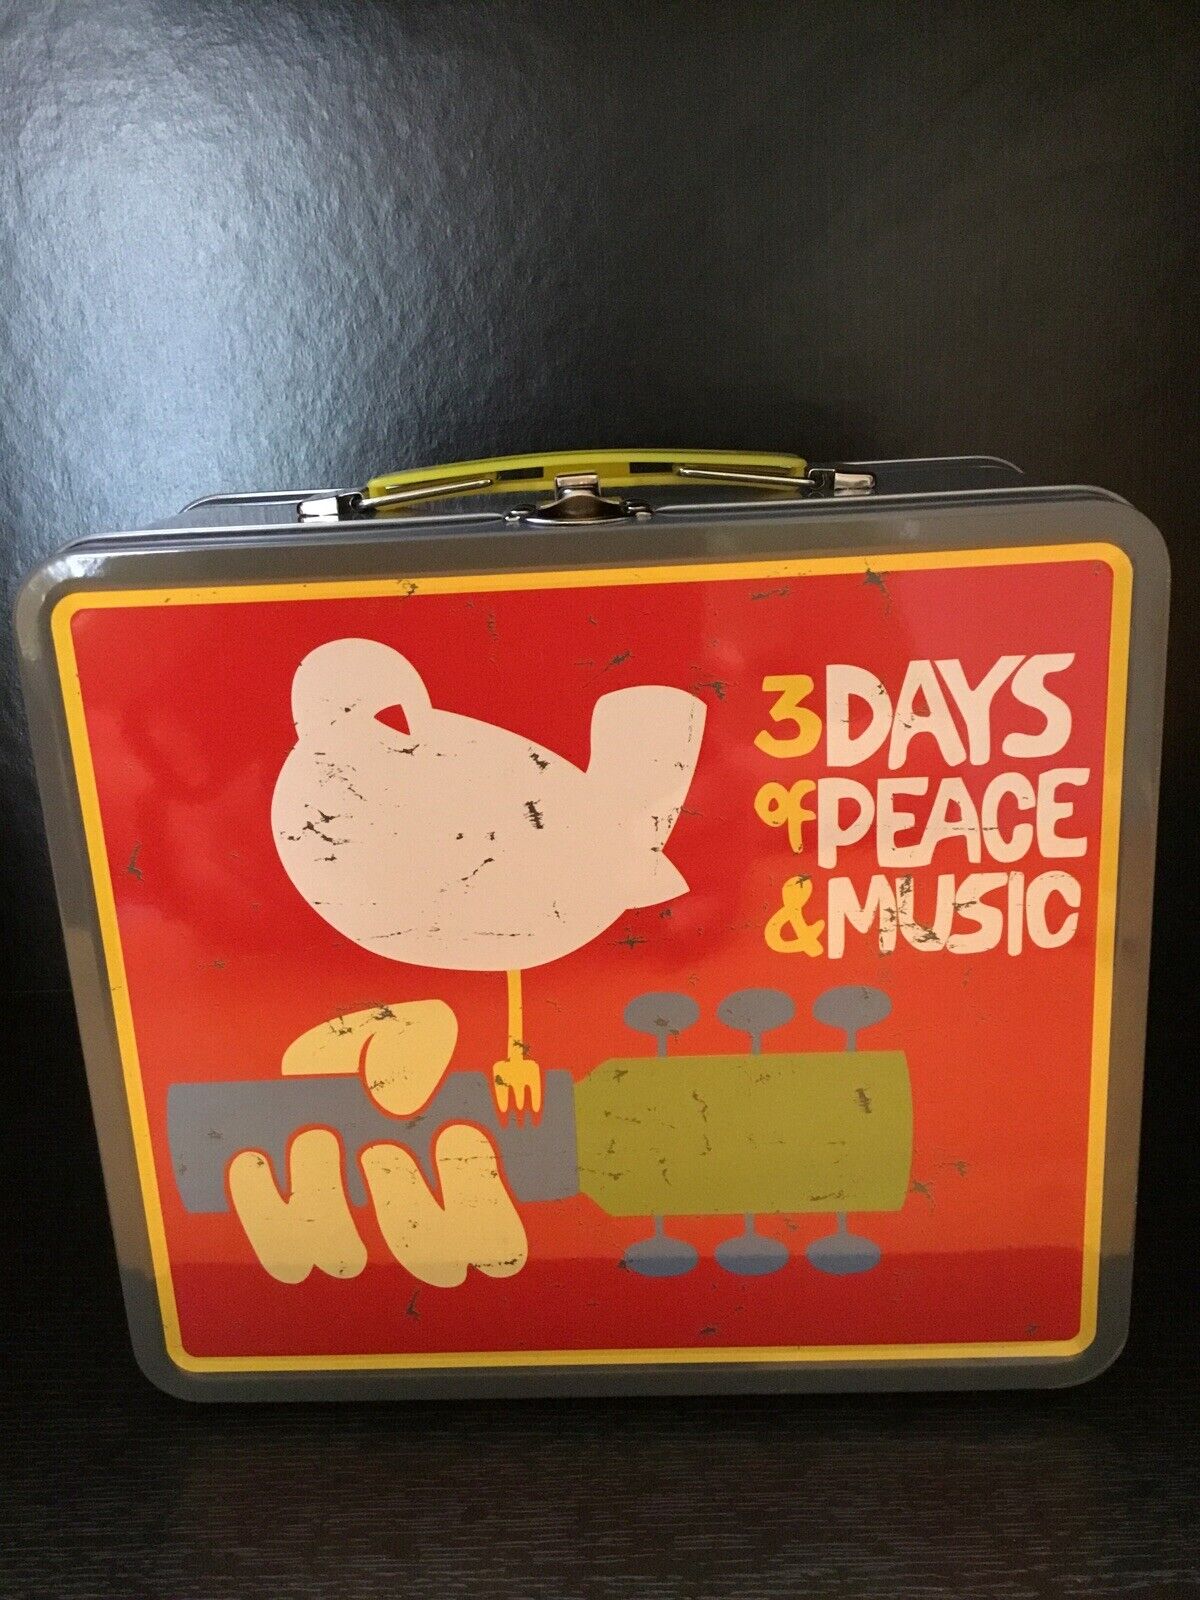 NEW - Woodstock 50th Anniversary Collectible Commemorative Lunch Box 2019©️